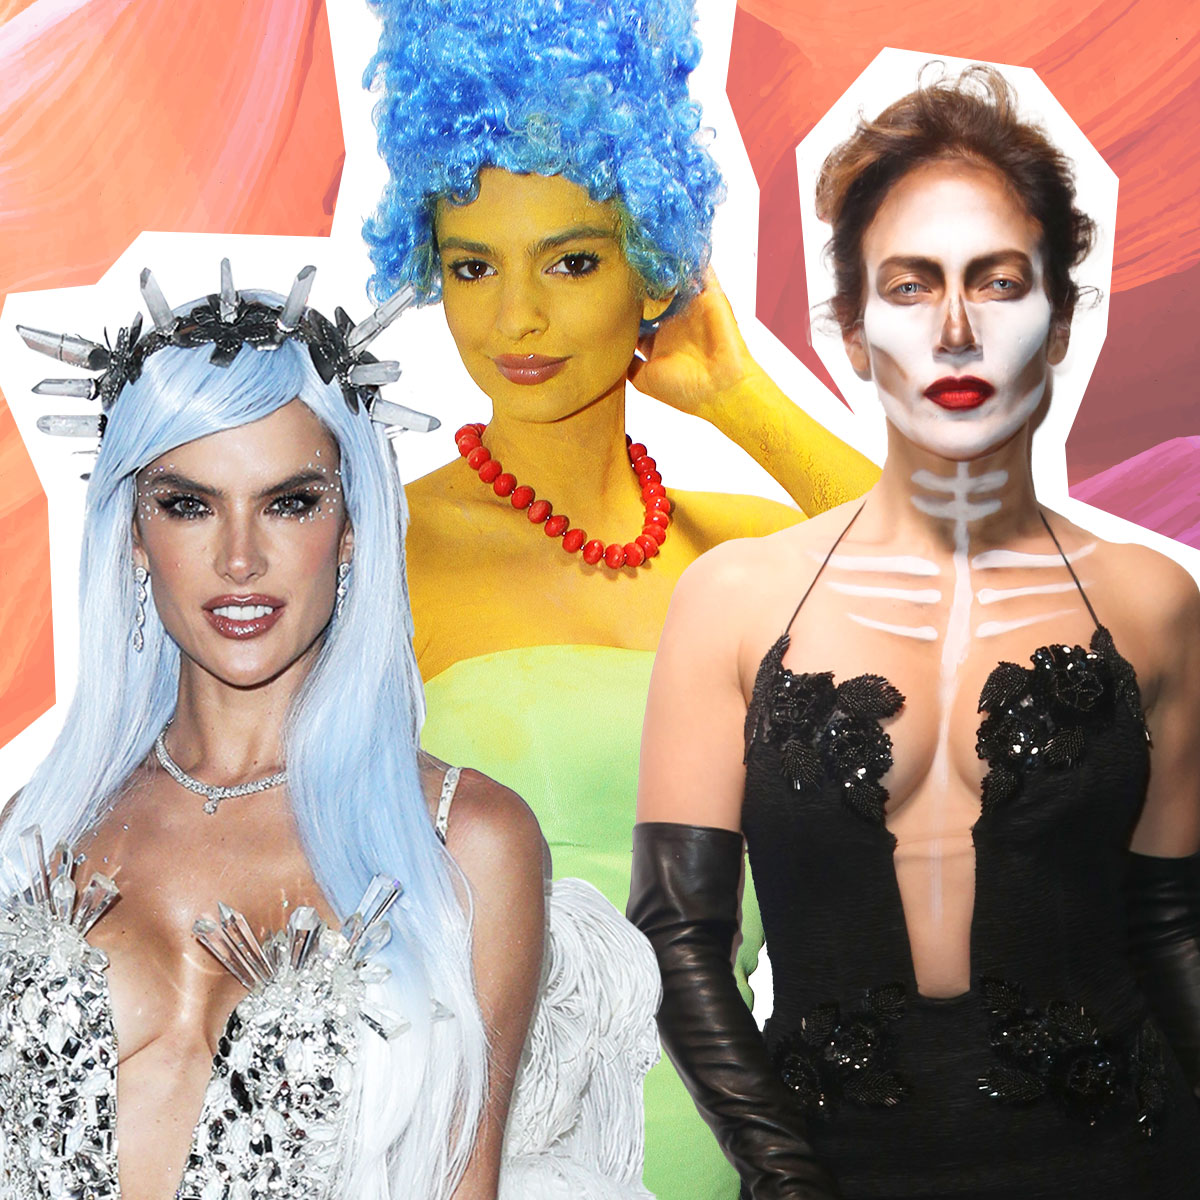 30 Red Carpet Outfits That Look Like Halloween Costumes